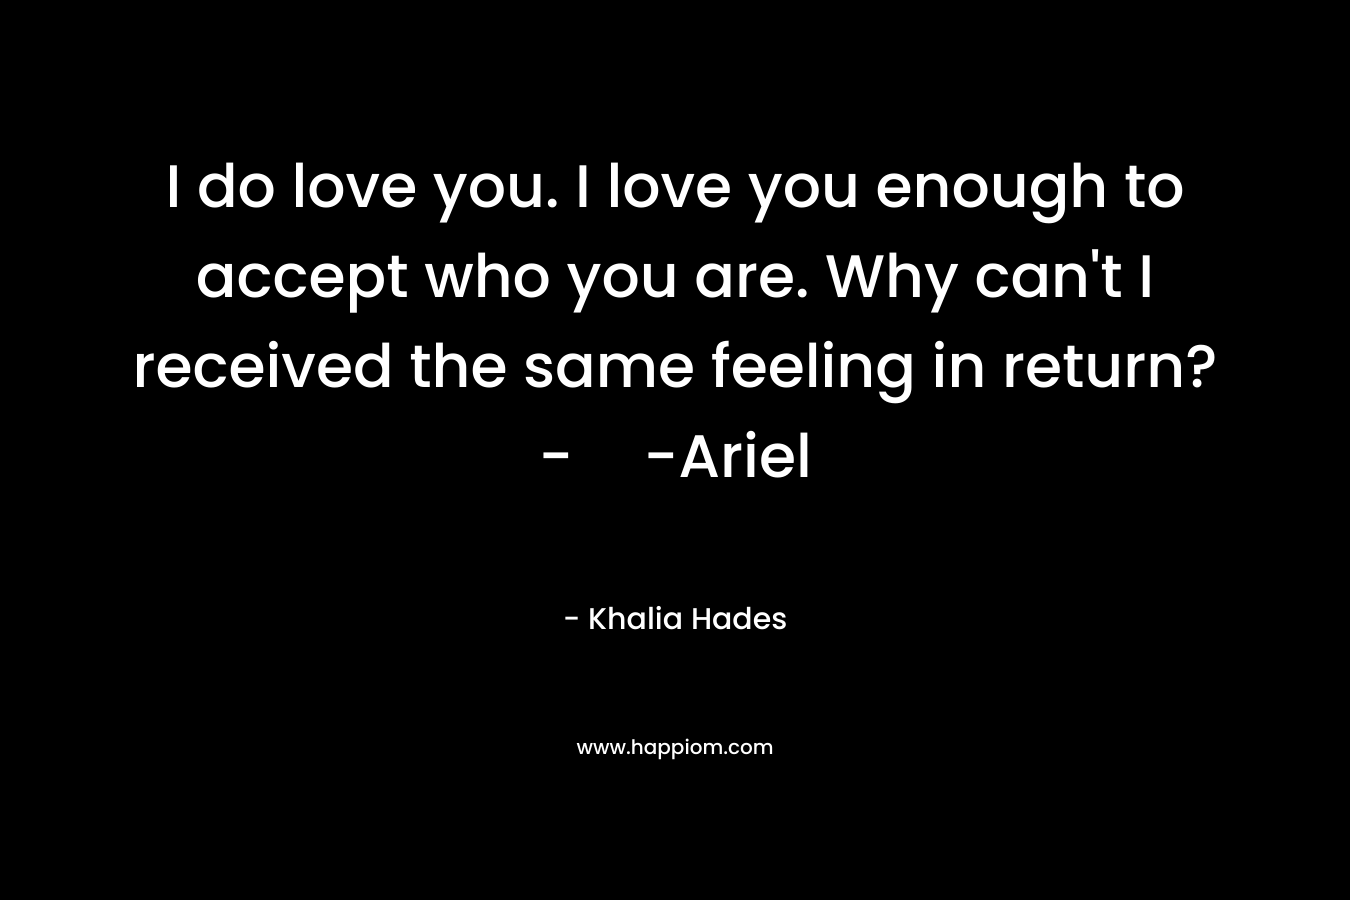 I do love you. I love you enough to accept who you are. Why can’t I received the same feeling in return?--Ariel – Khalia Hades